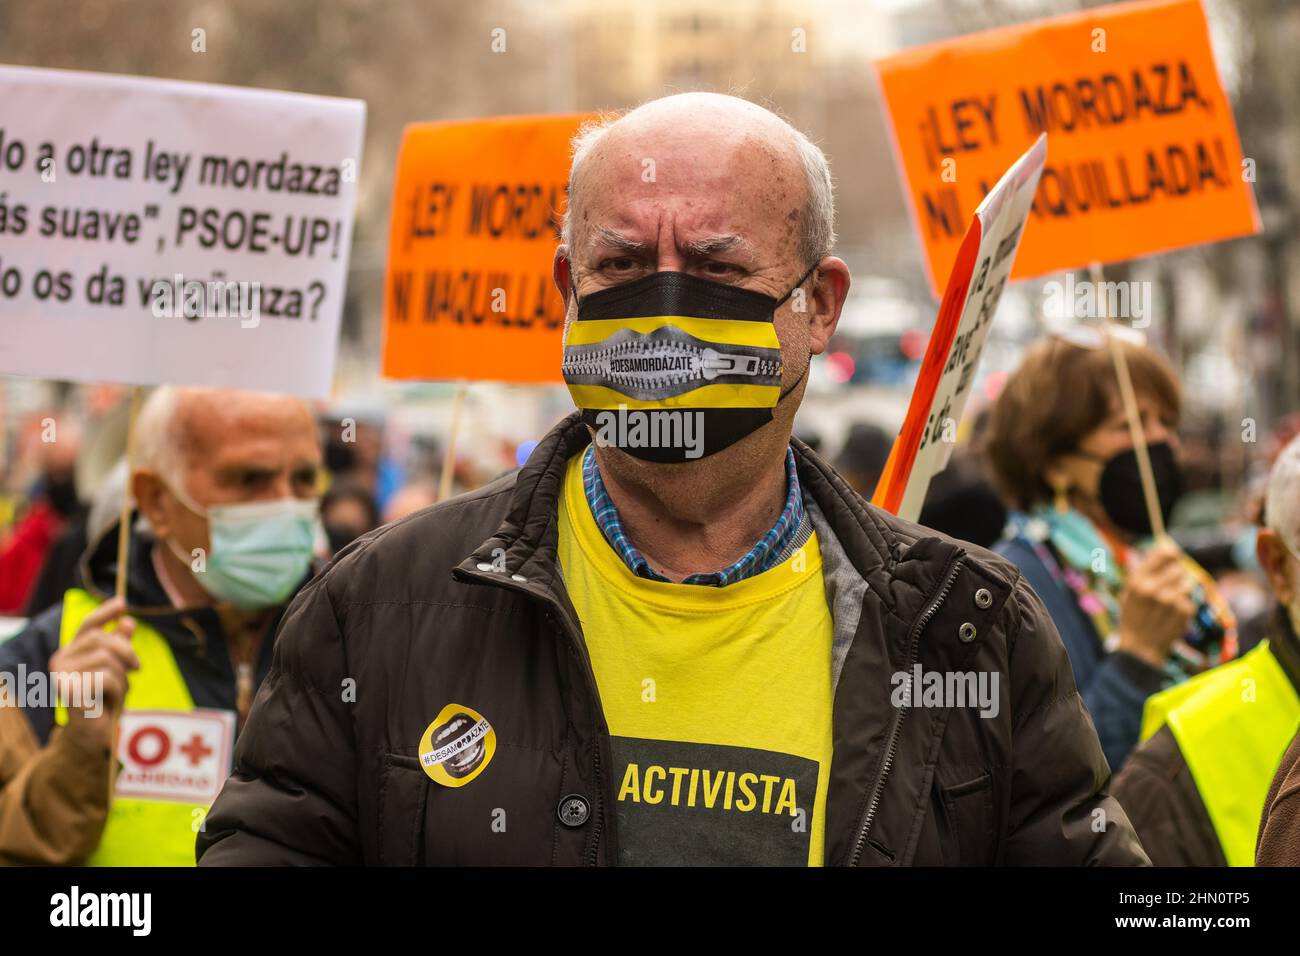 Madrid, Spain. 13th Feb, 2022. A man with the word 'ungag' on his face mask is seen during a demonstration against the Citizen Security Law known as Gag Law (Ley Mordaza). The citizen platform 'No Somos Delito', together with groups, organizations and social movements that work for the defense of Human Rights, have called for a demonstration to demand that the reform of the Gag Law proposed by Government respond to some minimums that guarantee the free exercise of fundamental rights. Credit: Marcos del Mazo/Alamy Live News Stock Photo